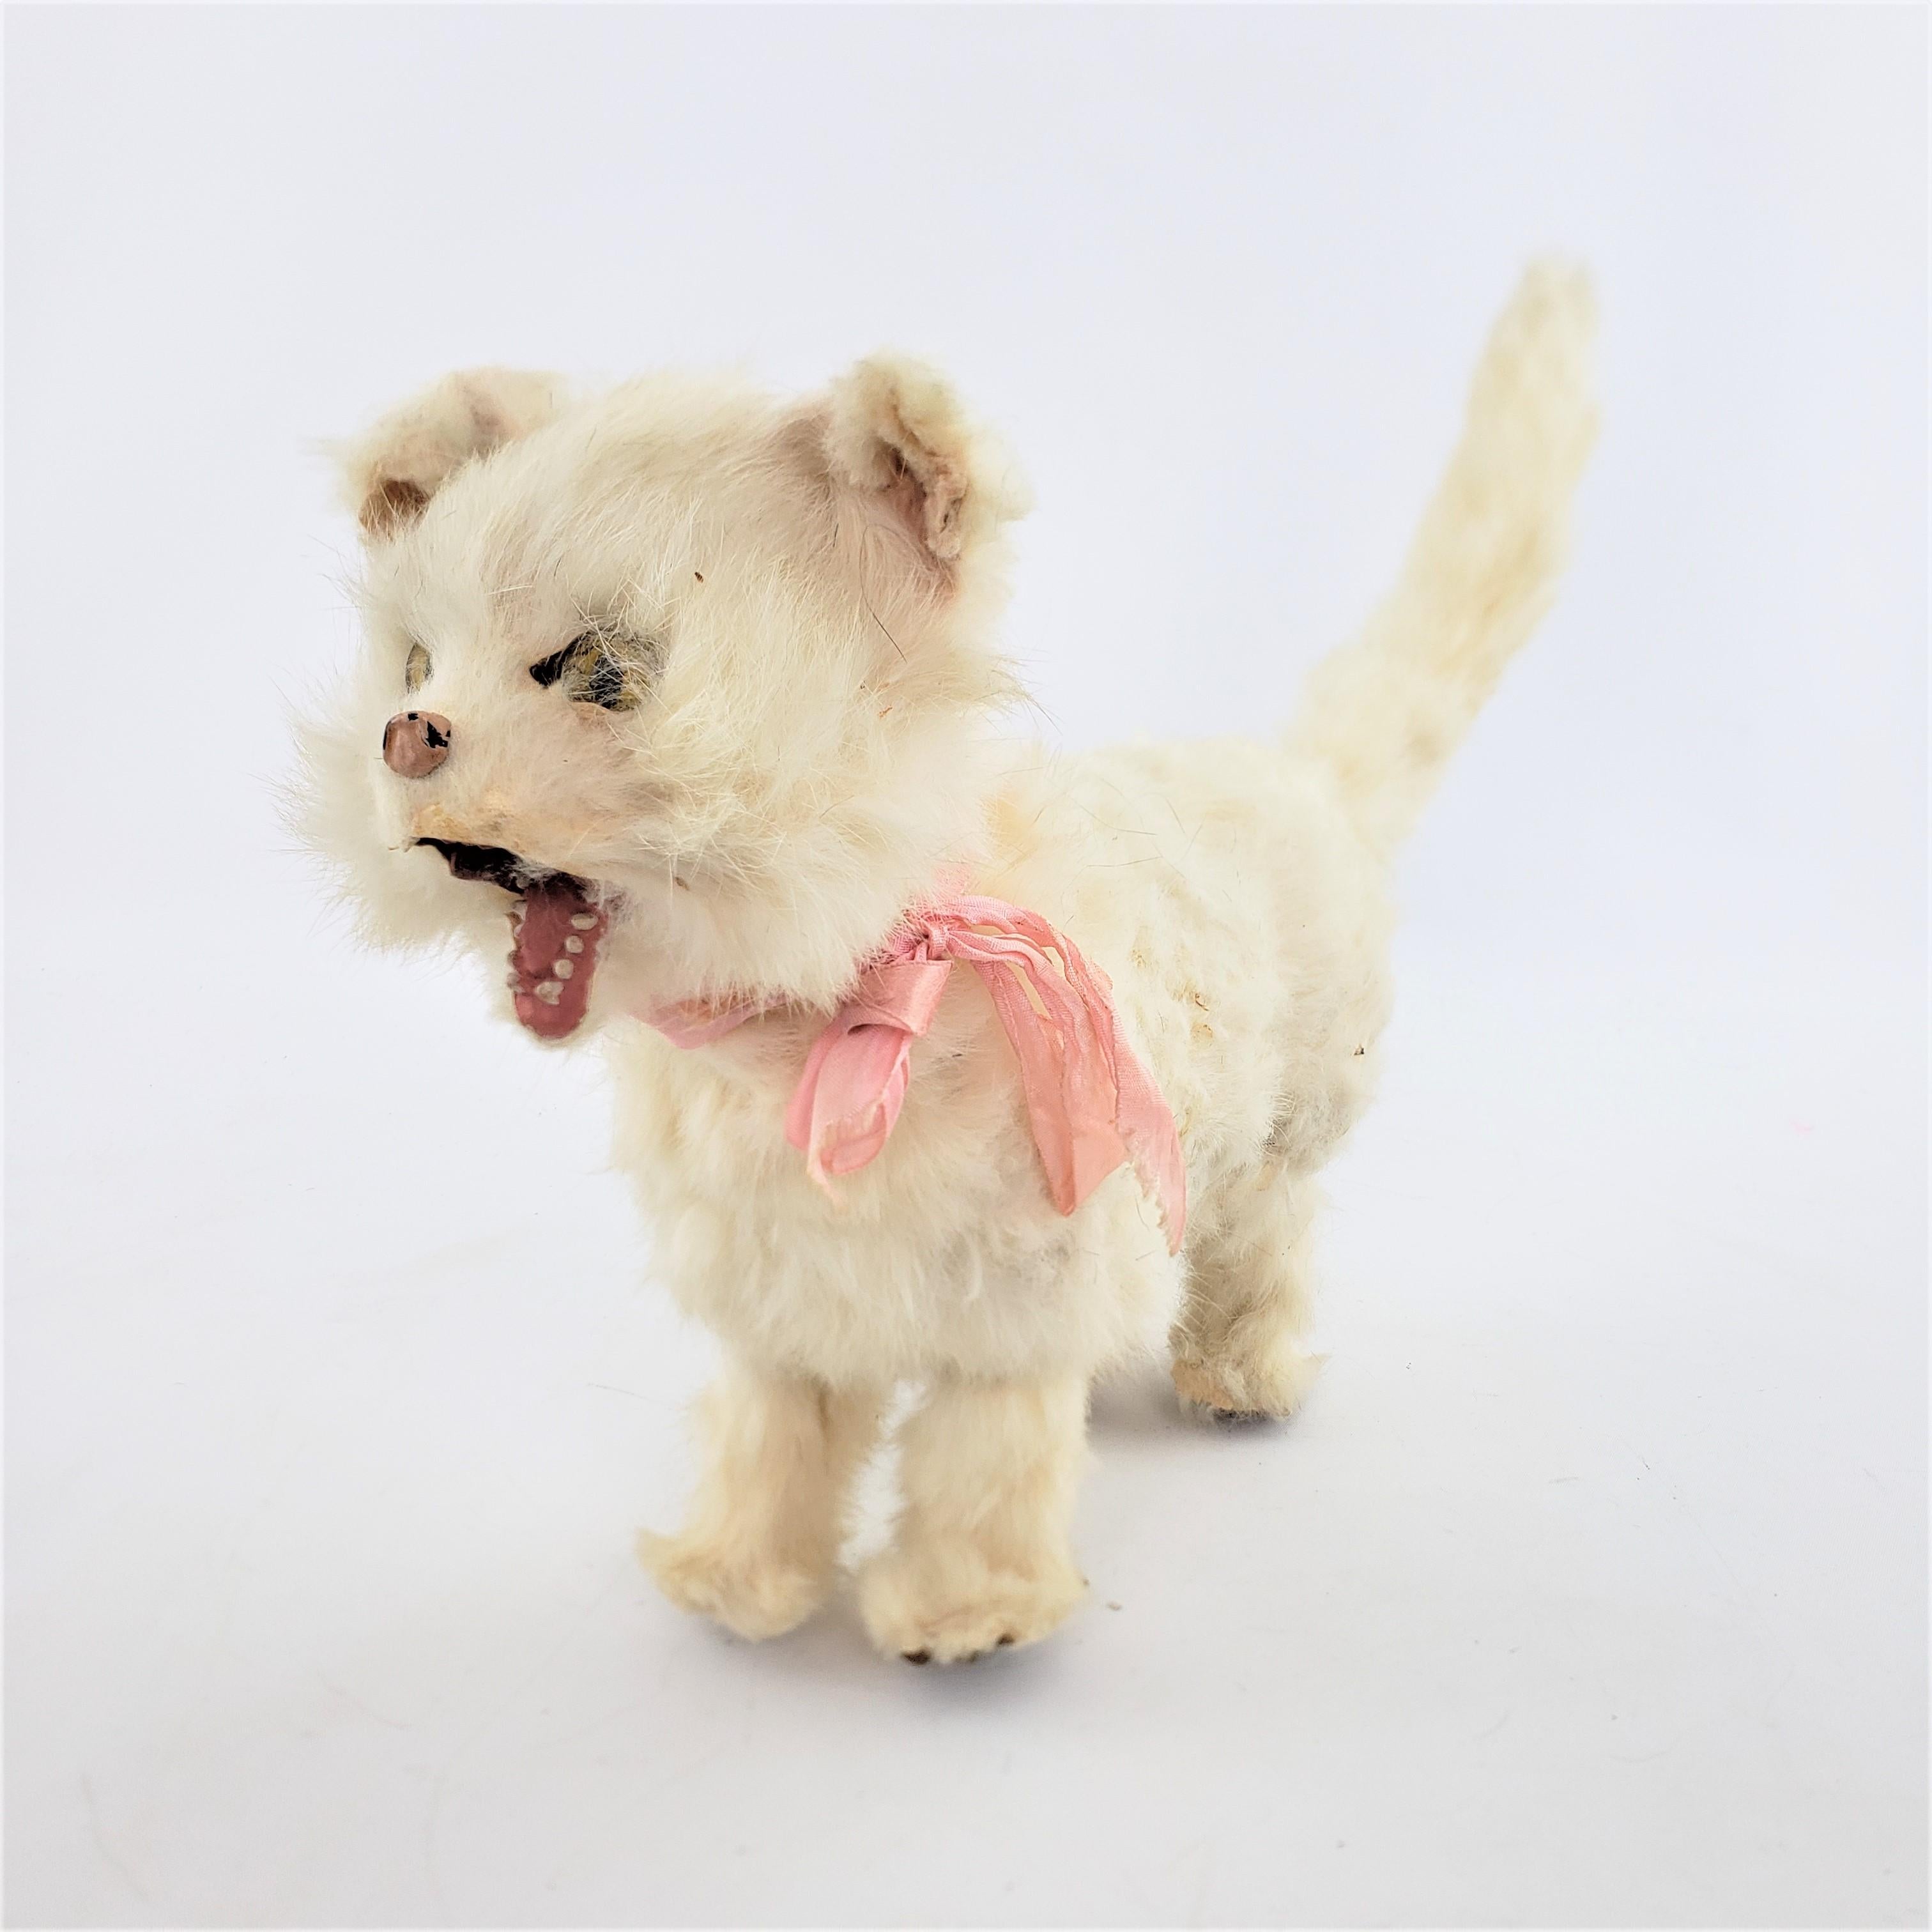 This antique mechanical toy is unsigned, but presumed to have been made in Europe, possibly England or Austria in approximately 1880 and done in the period Victorian style. The toy is a very large mechanically articulated white cat, which would have